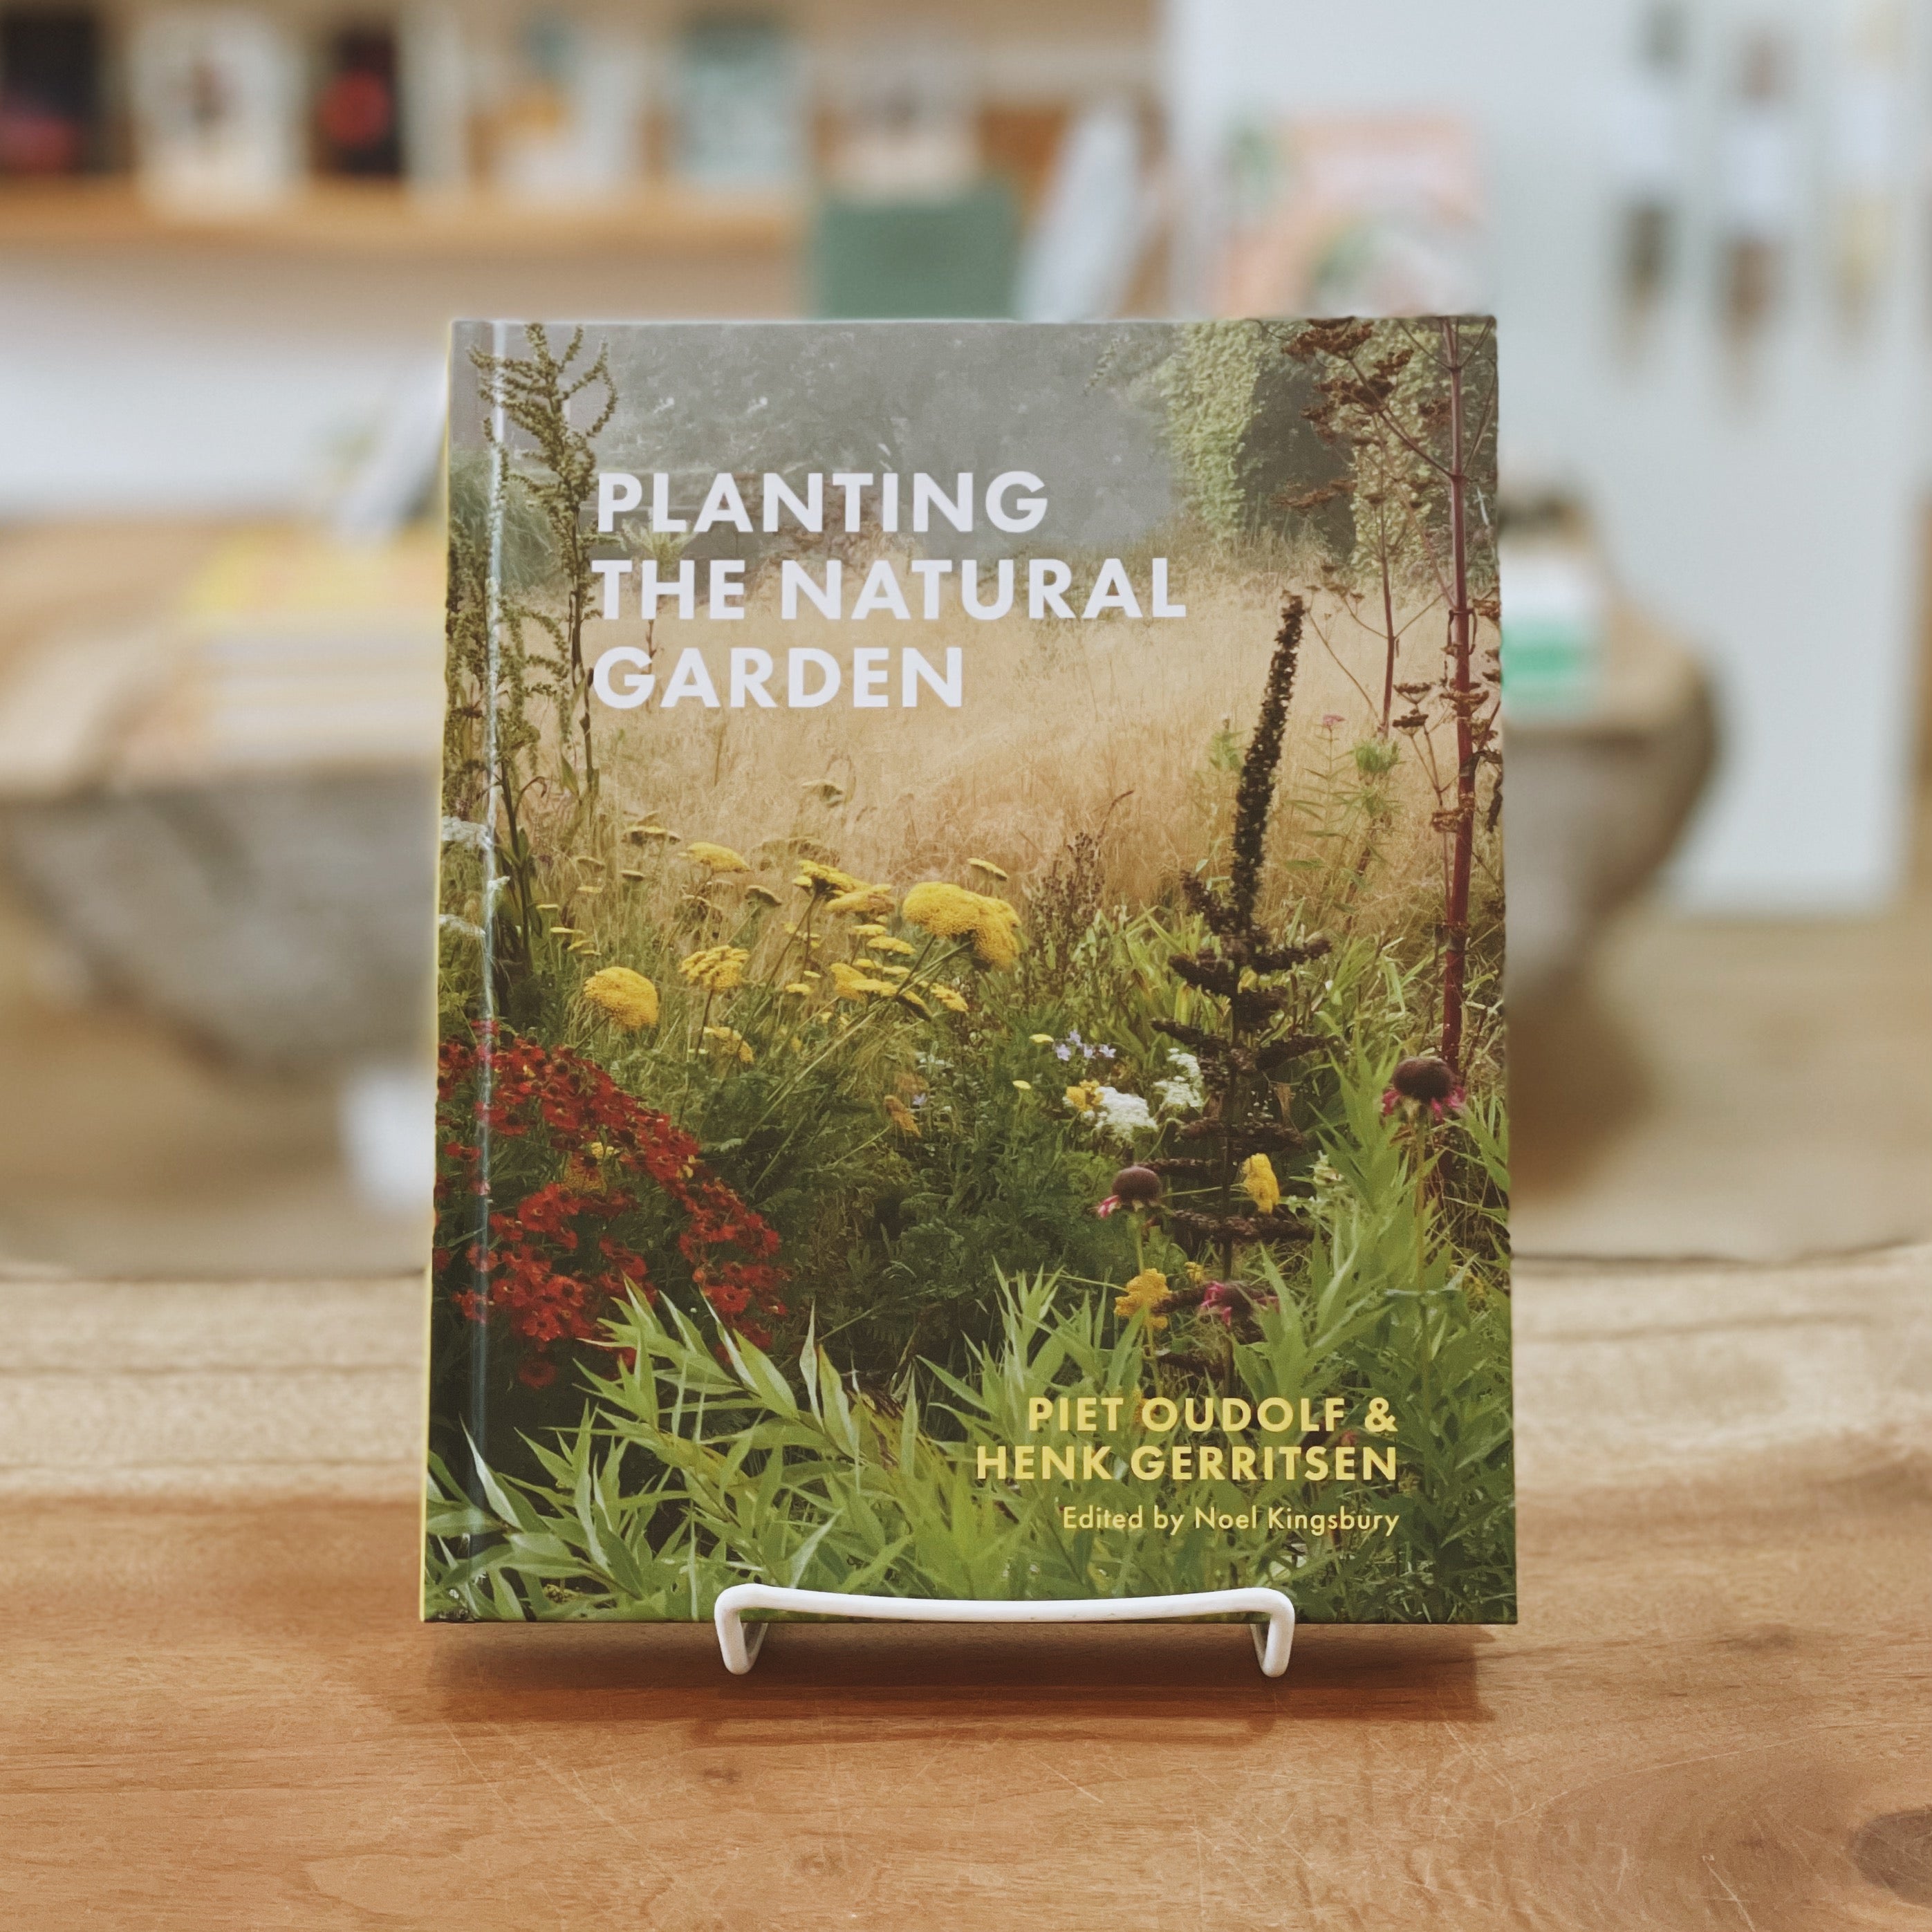 Planting the Natural Garden